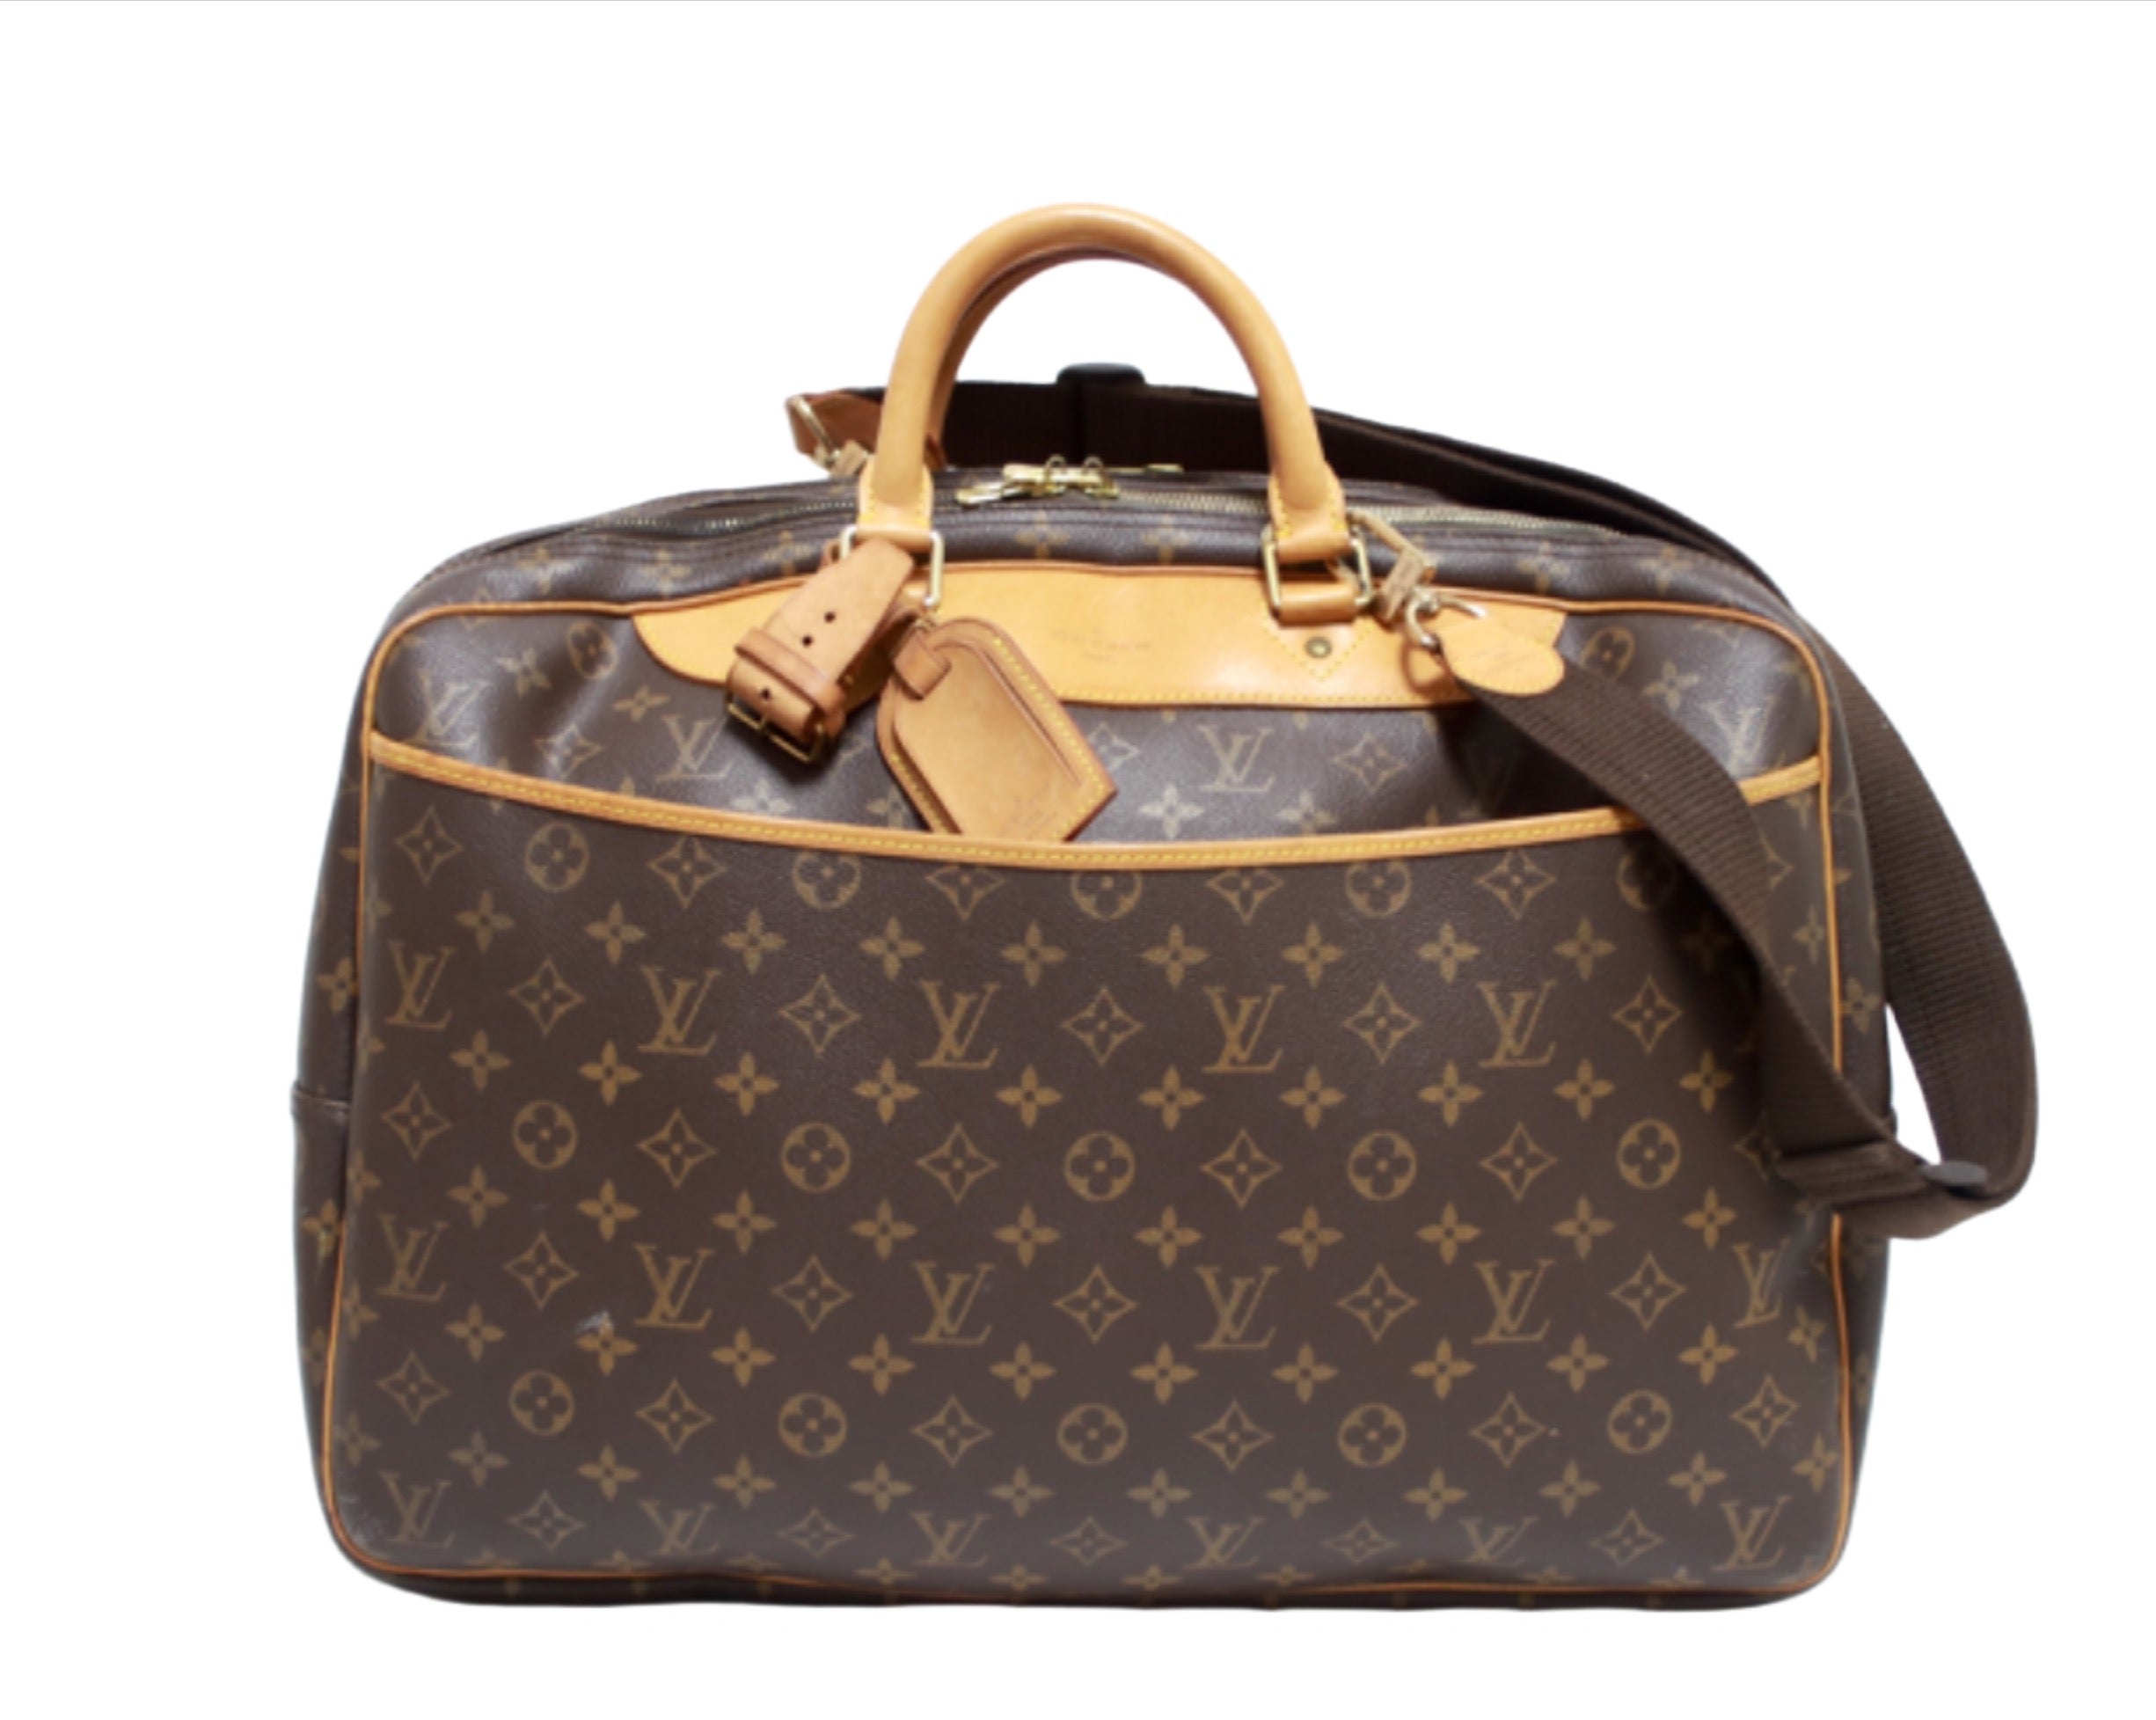 Louis Vuitton Alize Travel Bag Used (8343)